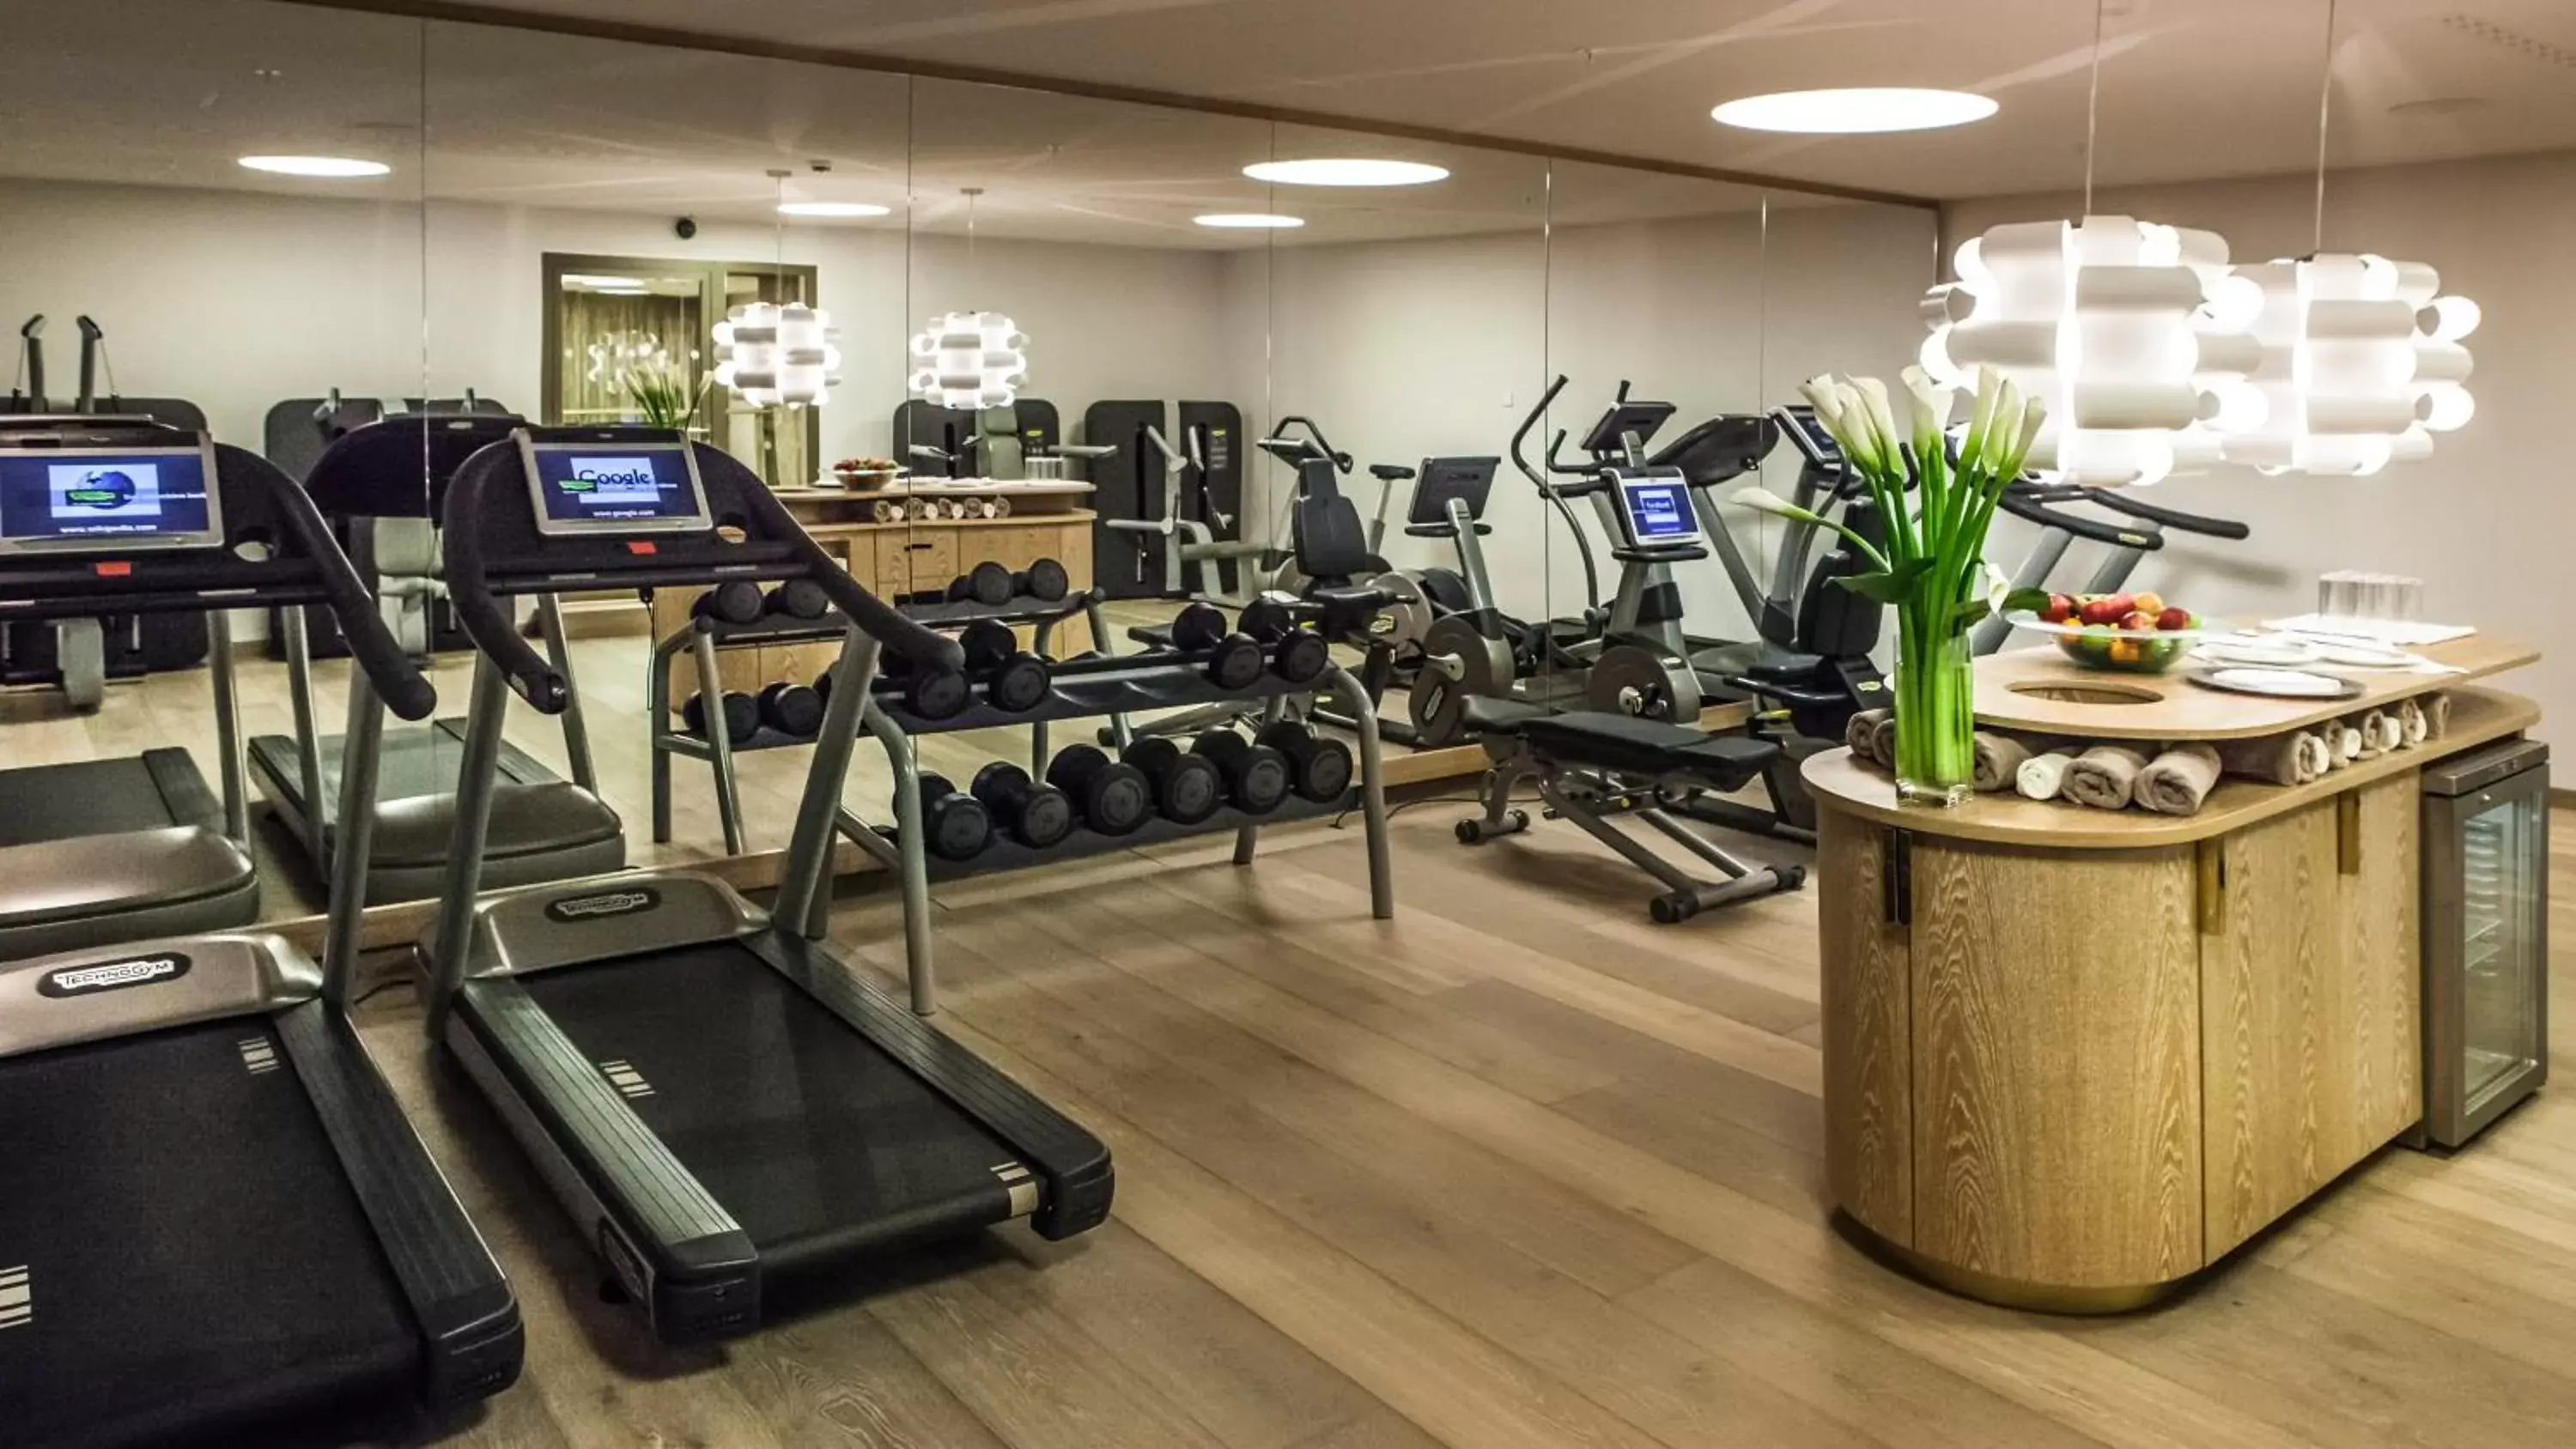 Fitness centre/facilities in AlpenGold Hotel Davos